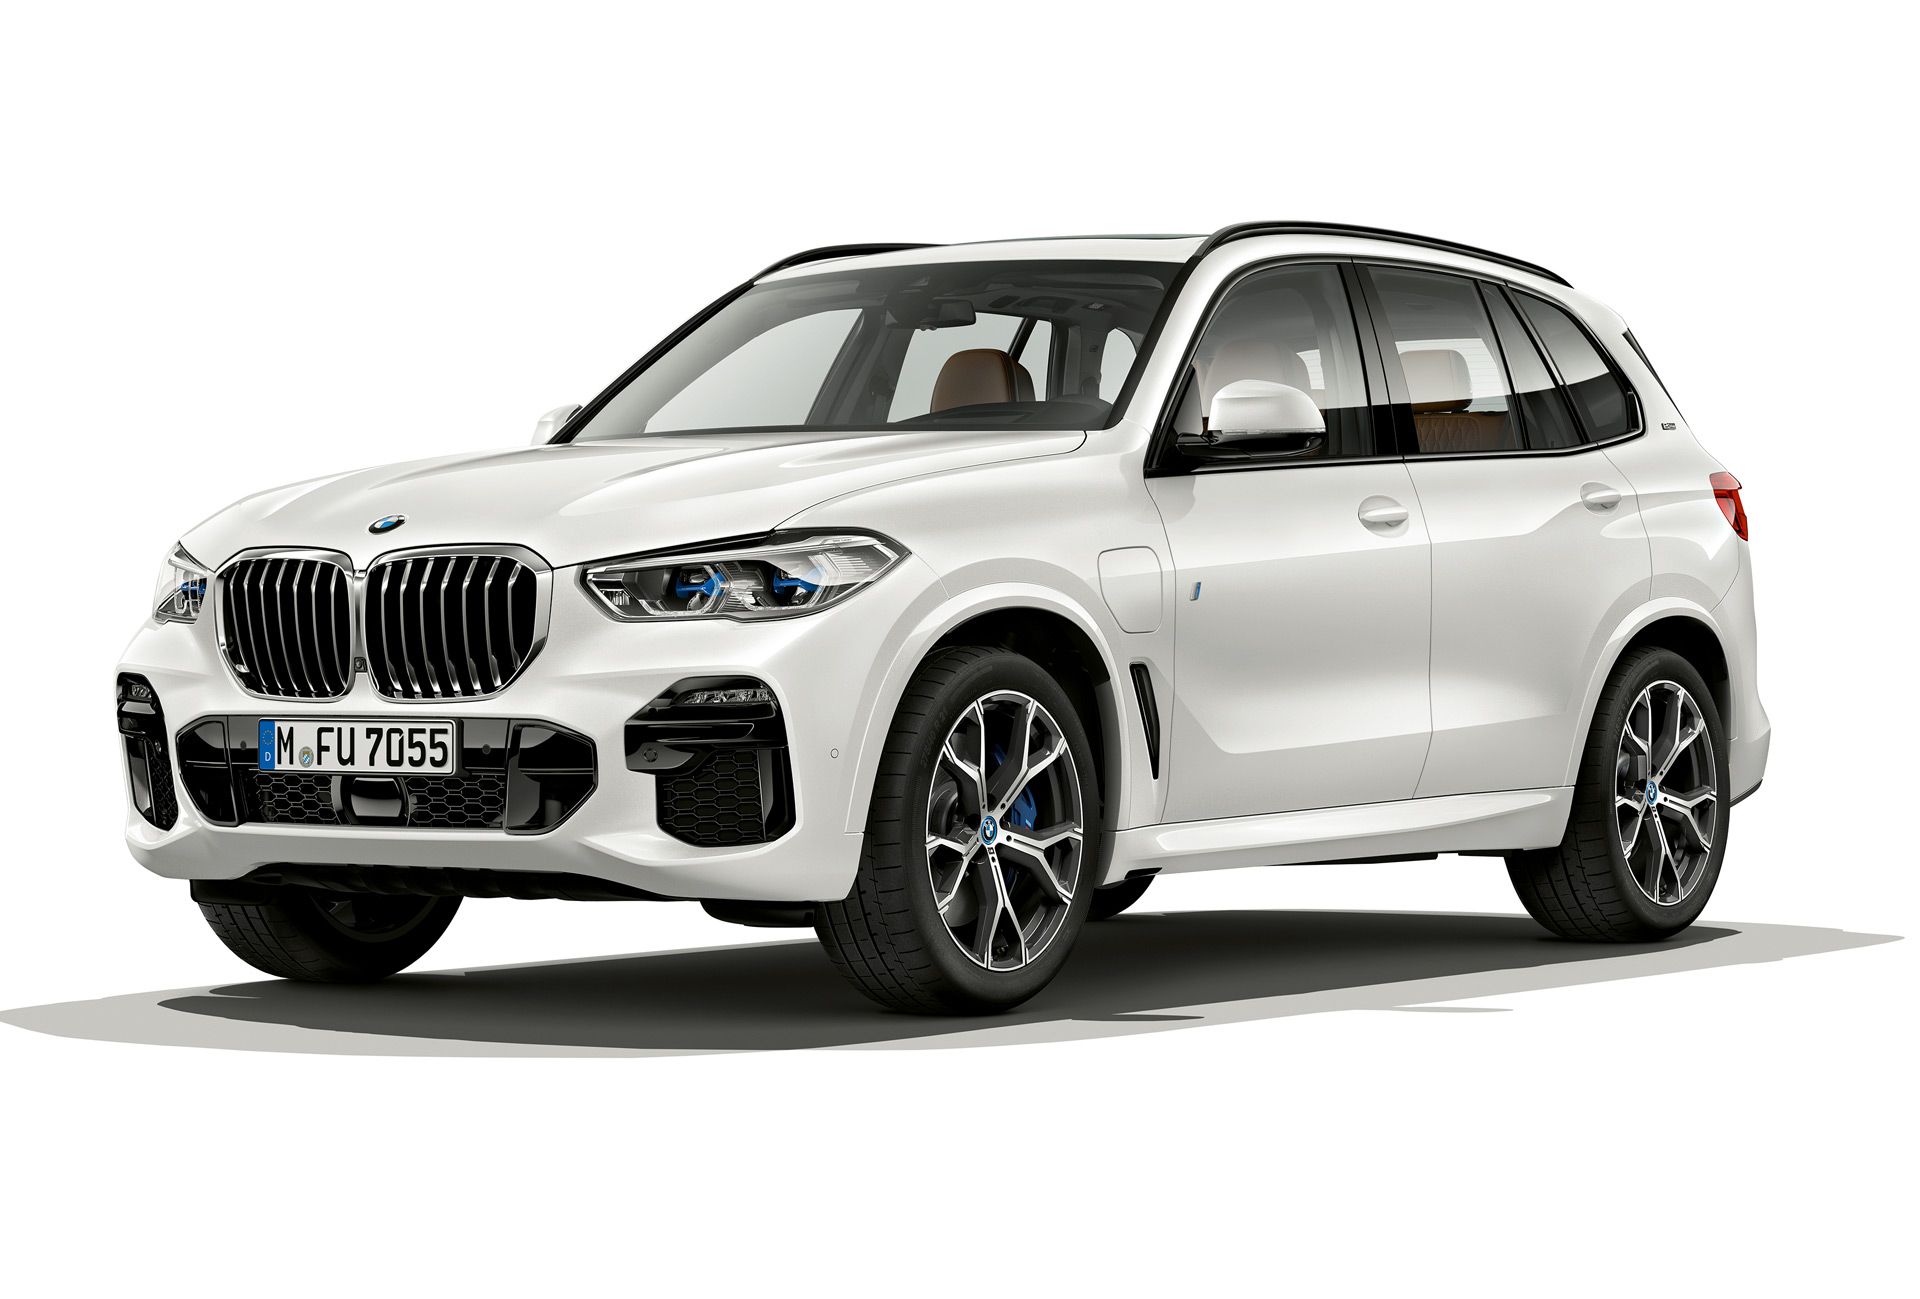 BMW X5 XDrive45e Plug In Hybrid Will Have More Range, 6 Cylinders